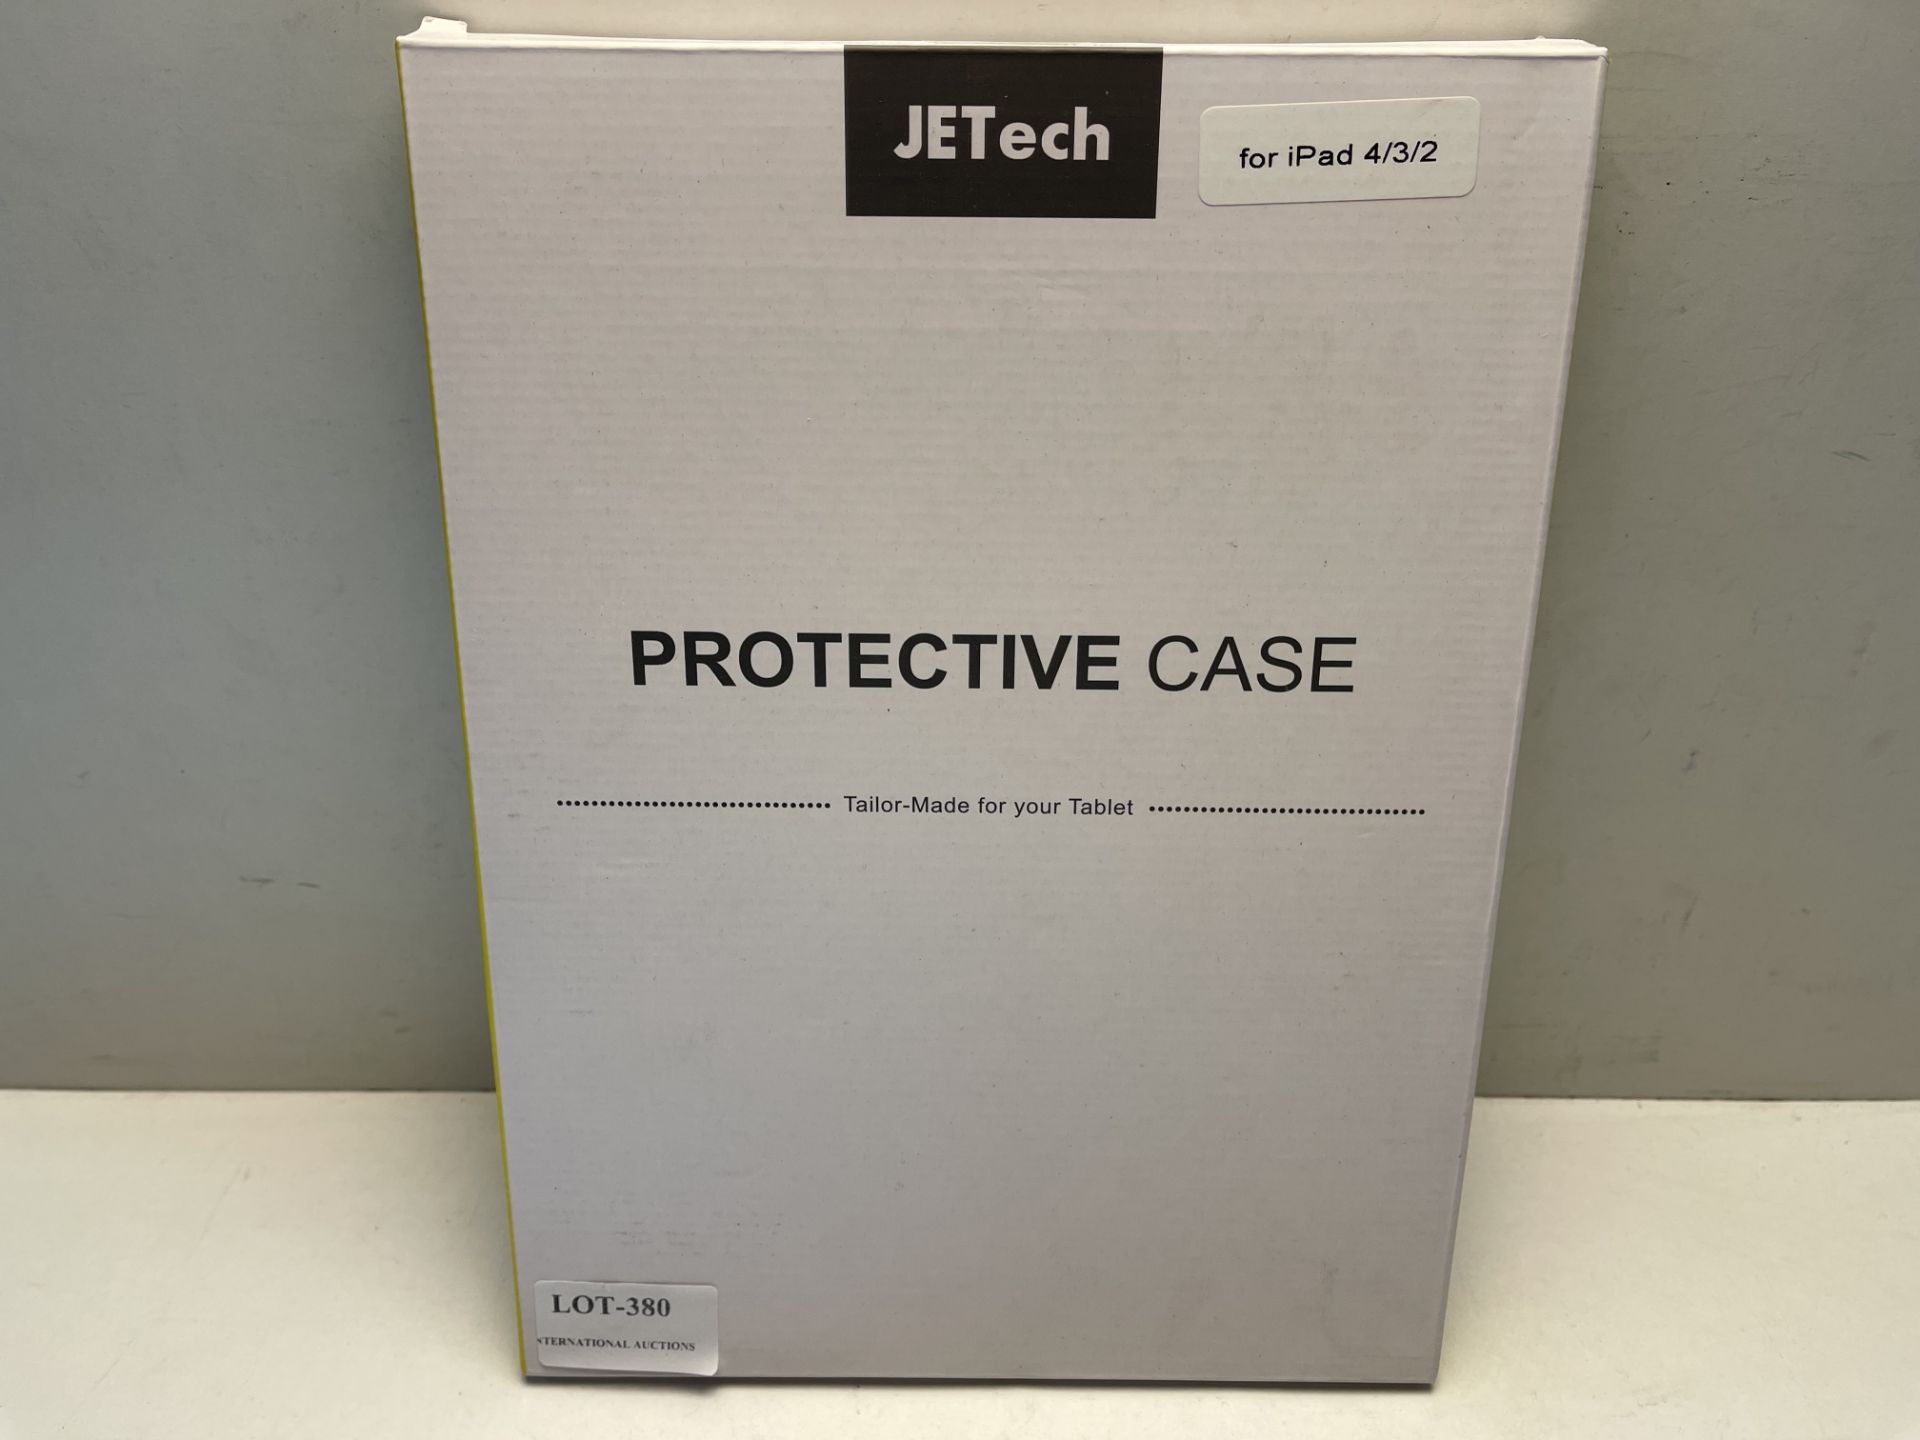 JETech Case for iPad 2 3 4 (Oldest Models), Smart Cover Auto Wake/Sleep (Dark Grey) Â£11.99Condition